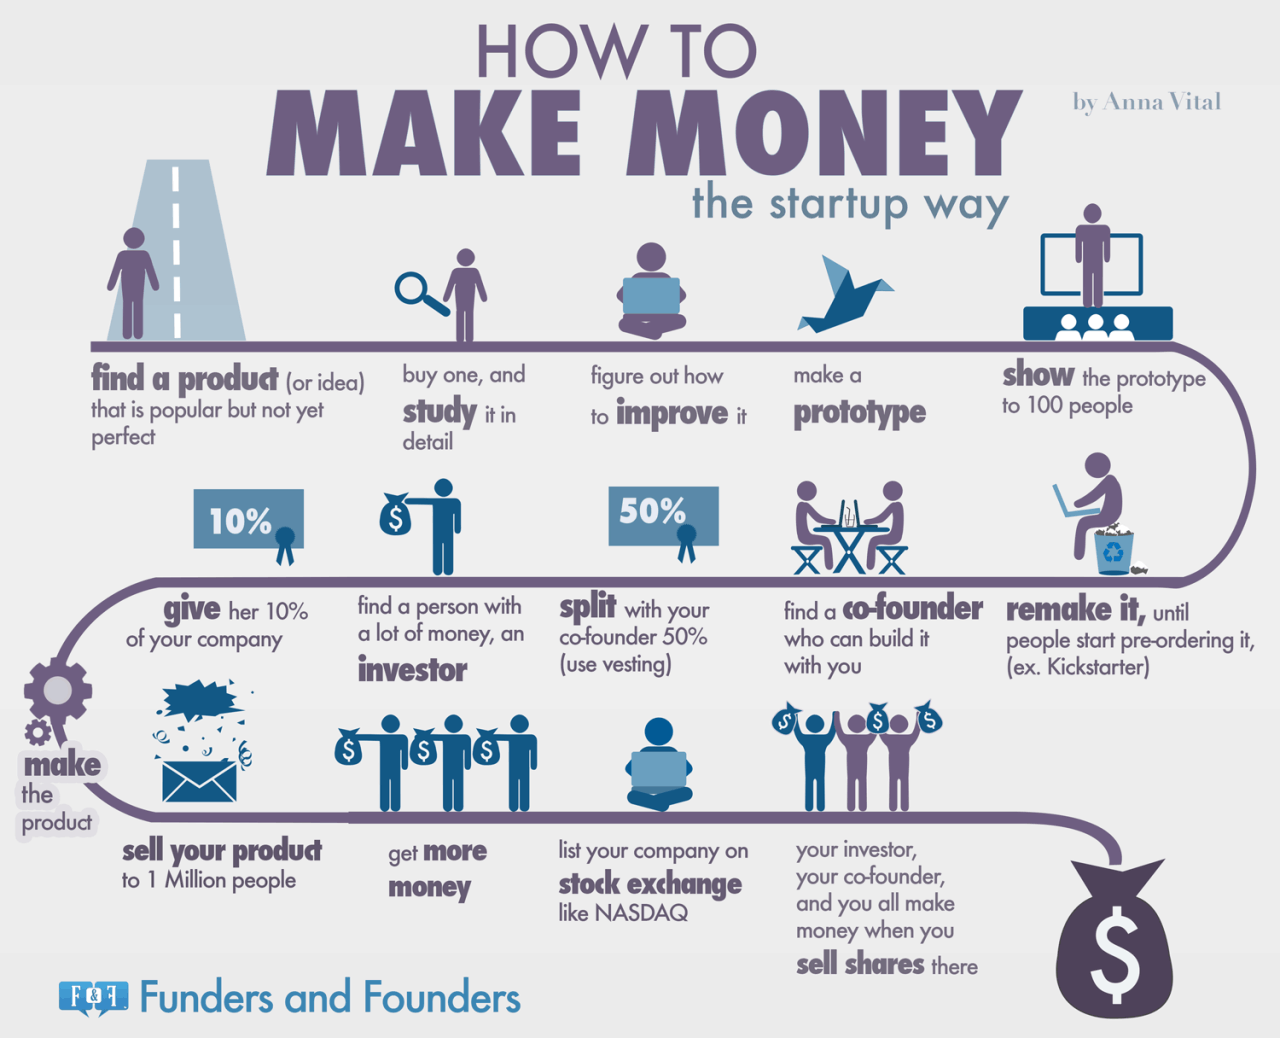 how-to-make-money-the-startup-way-infographic (1)